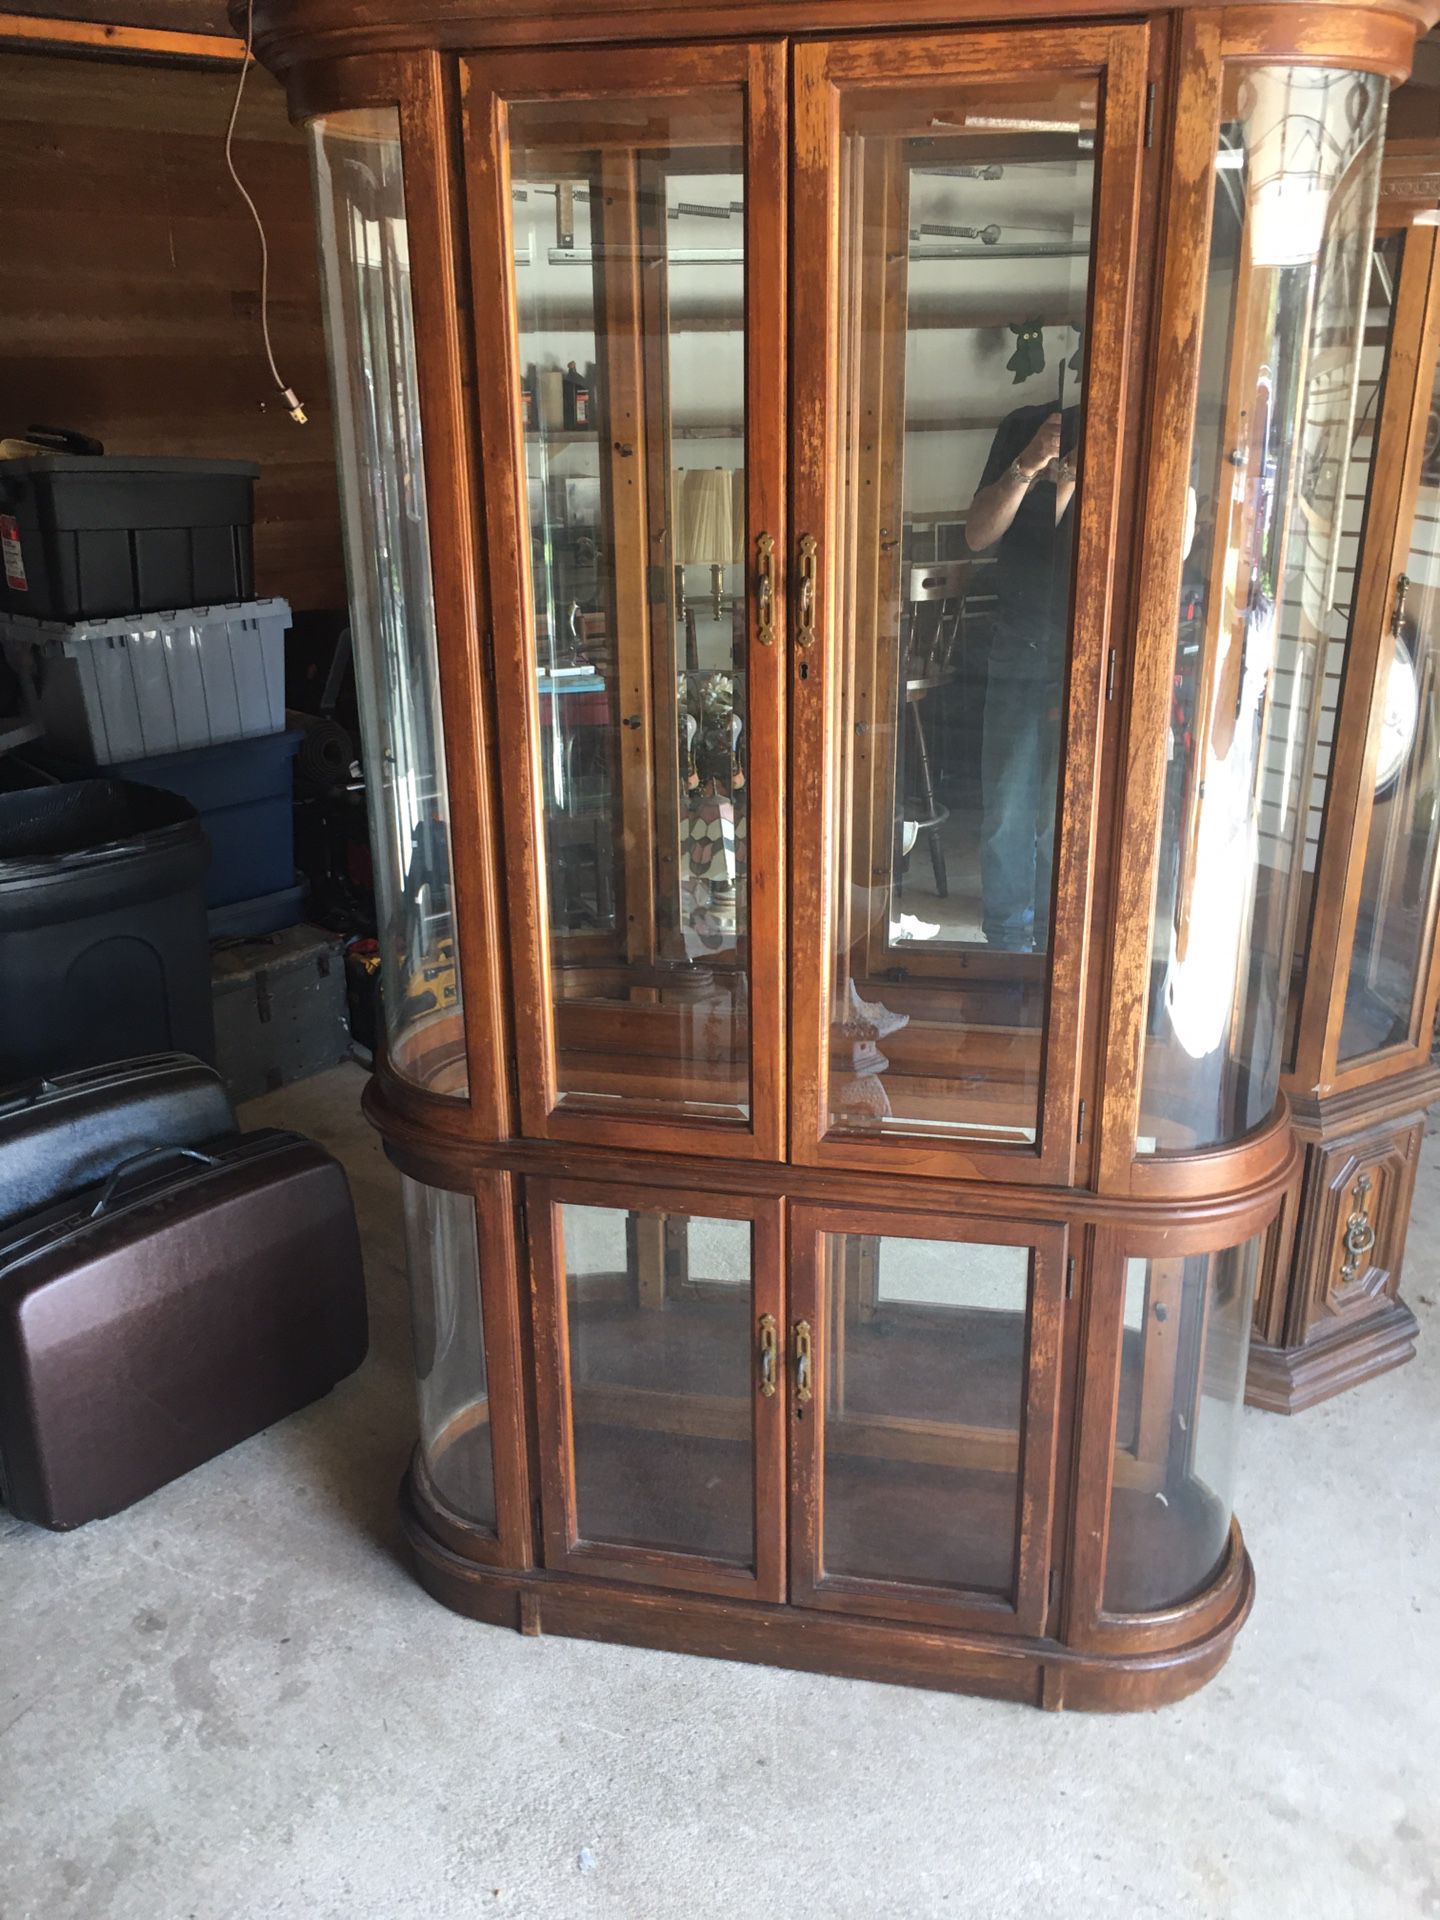 Curio Cabinet With Glass Doors And Shelves